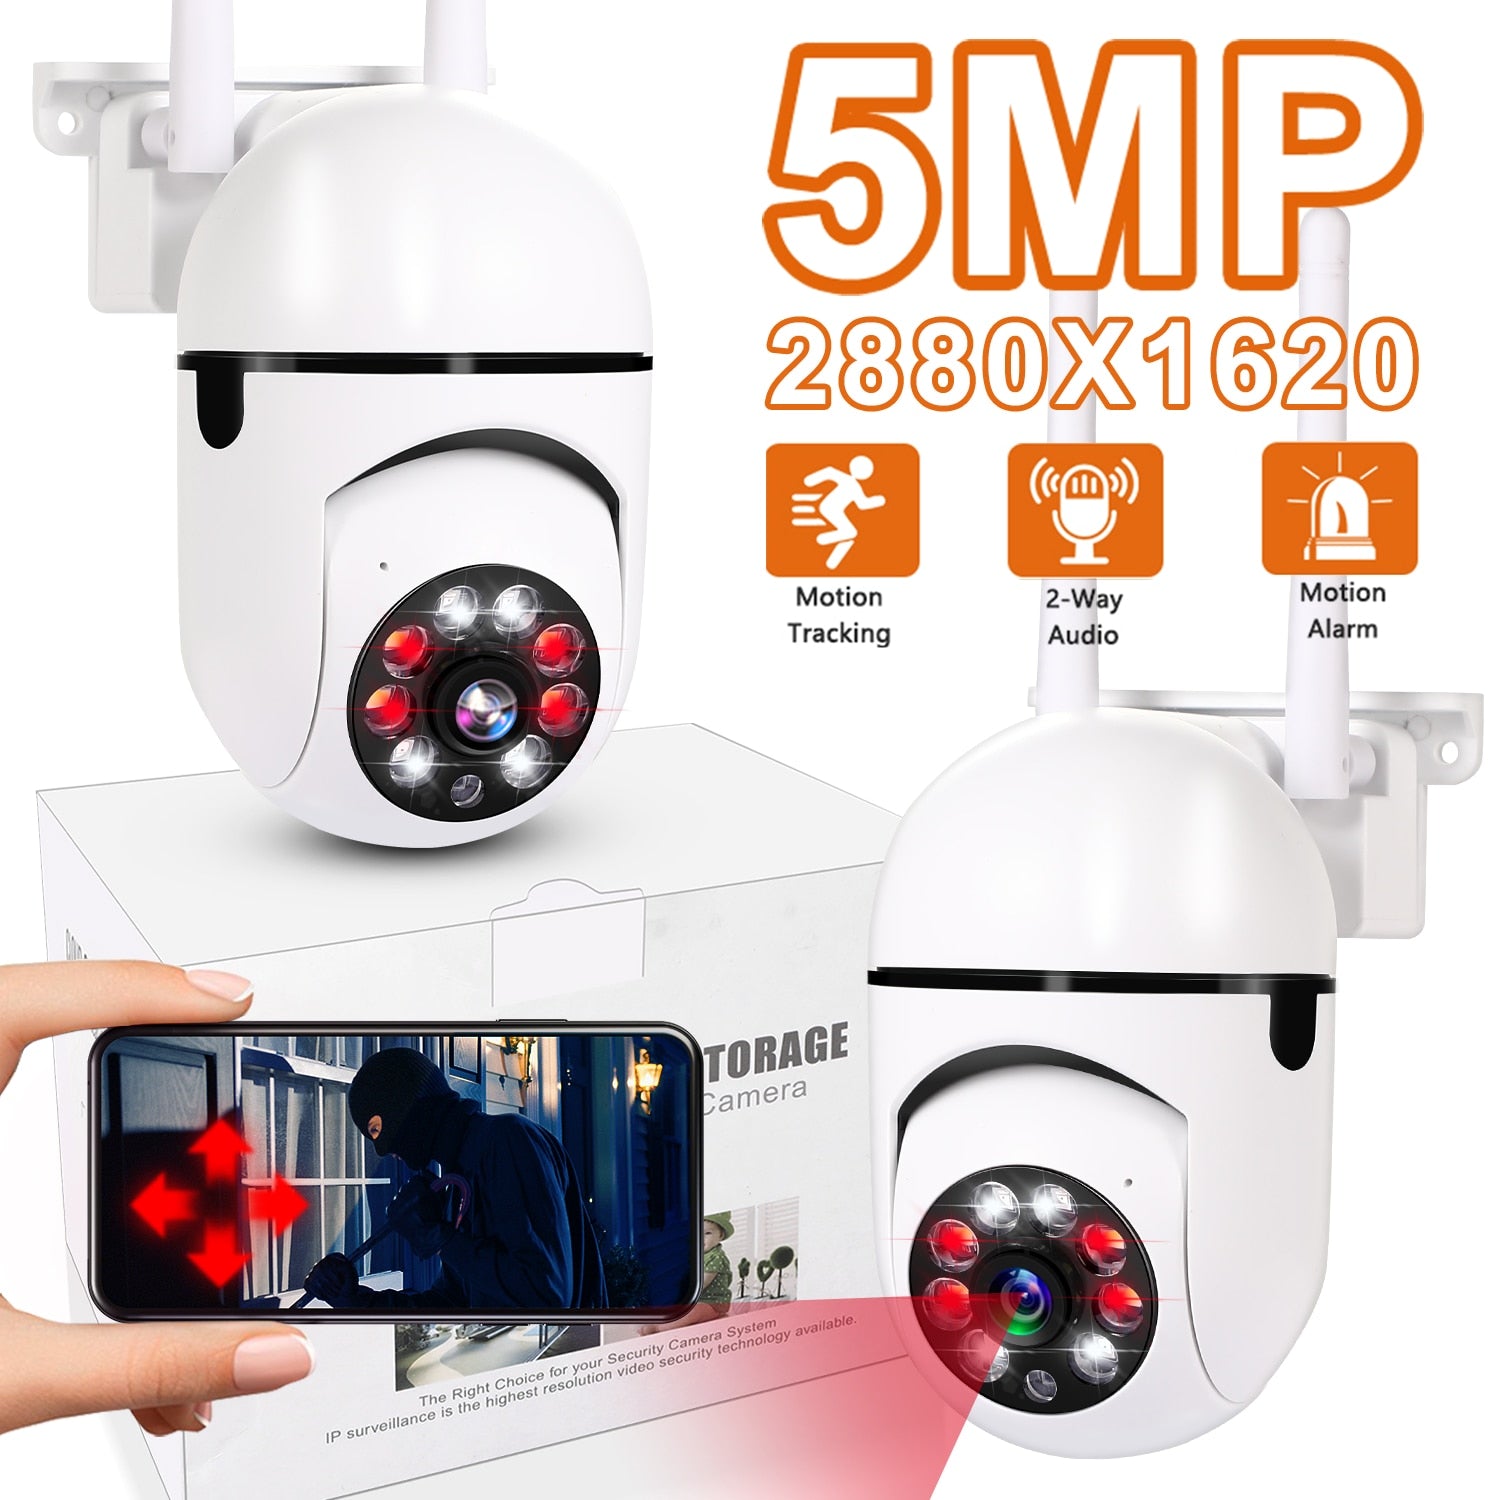 Outdoor 5MP Surveillance Camera CCTV IP Wifi Camera Waterproof External Security Protection Wireless Home Monitor Motion Trcking